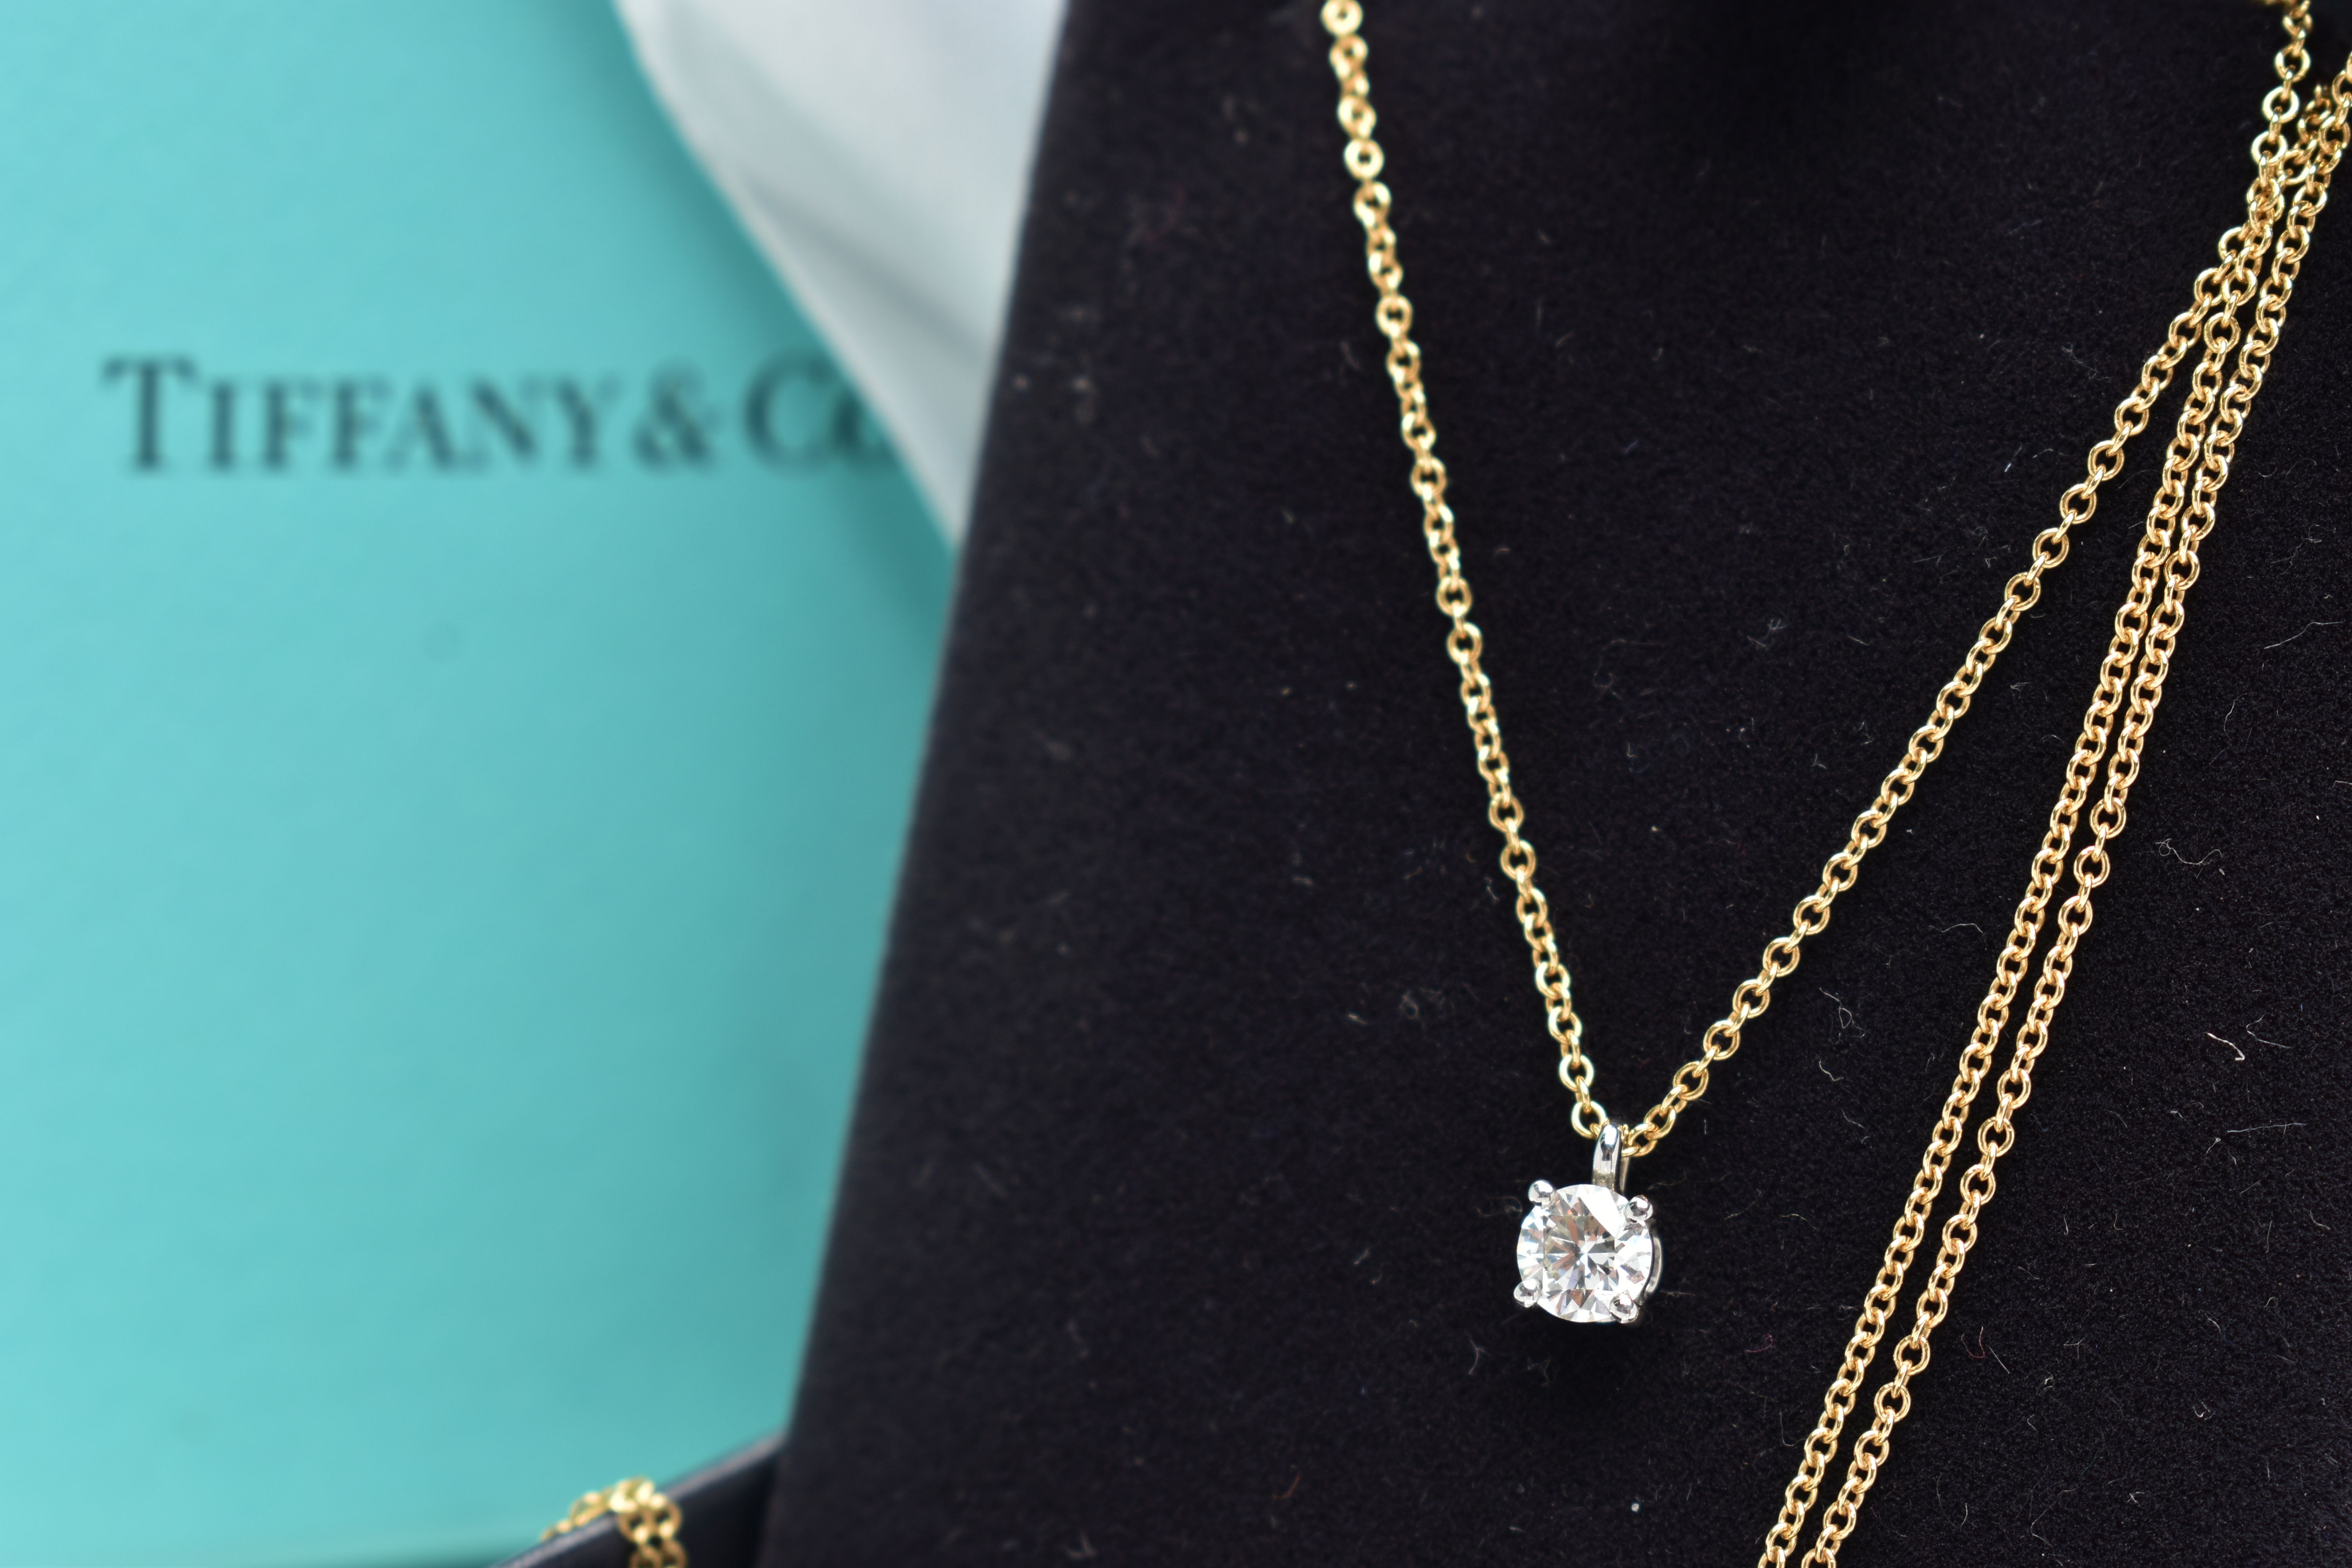 AN 18CT YELLOW AND WHITE GOLD TIFFANY & CO DIAMOND PENDANT NECKLACE, set with a round brilliant - Image 2 of 6